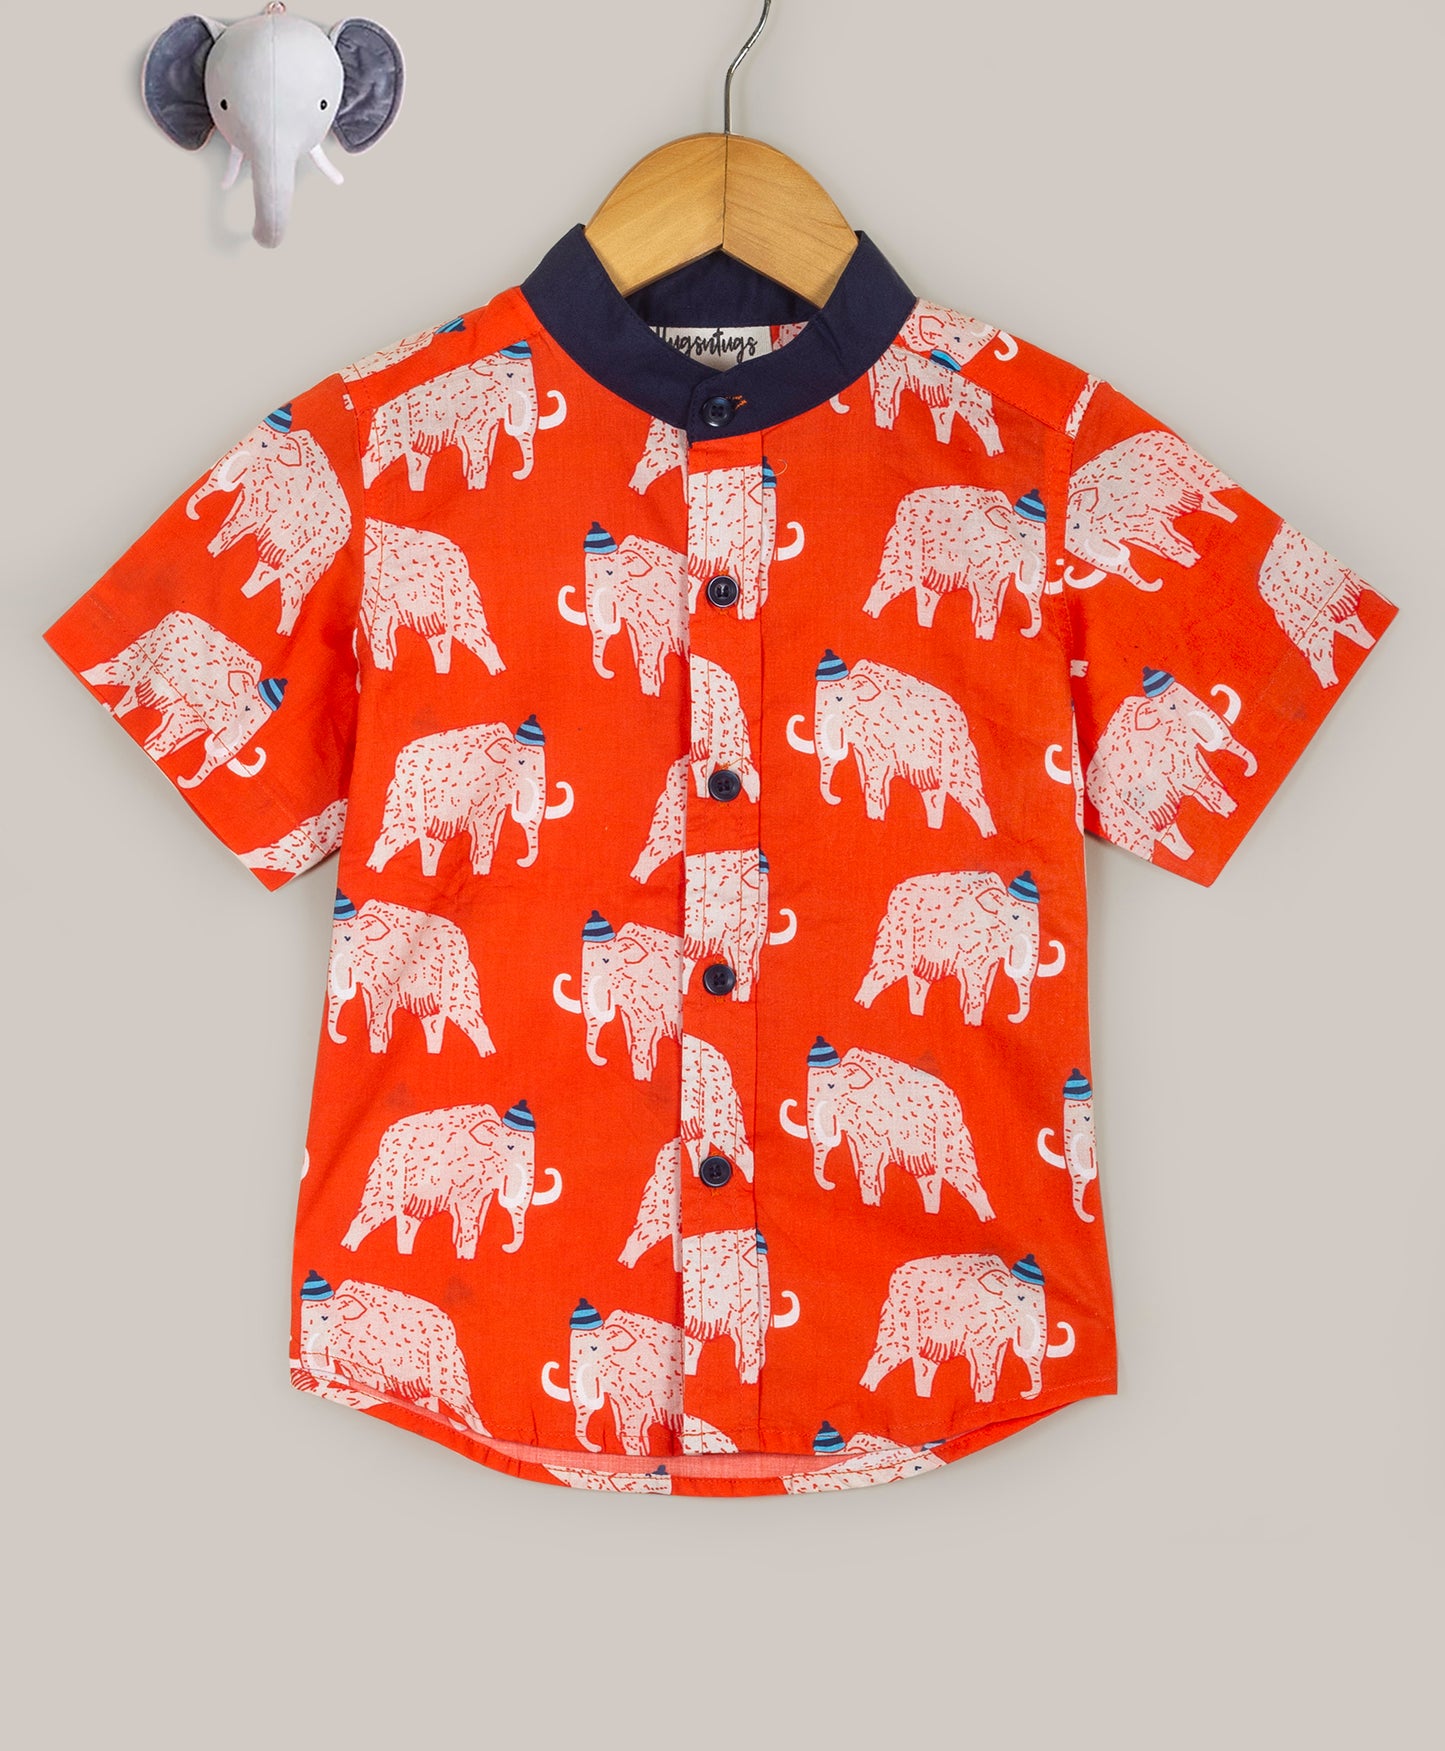 Red short sleeves shirt with elephant print